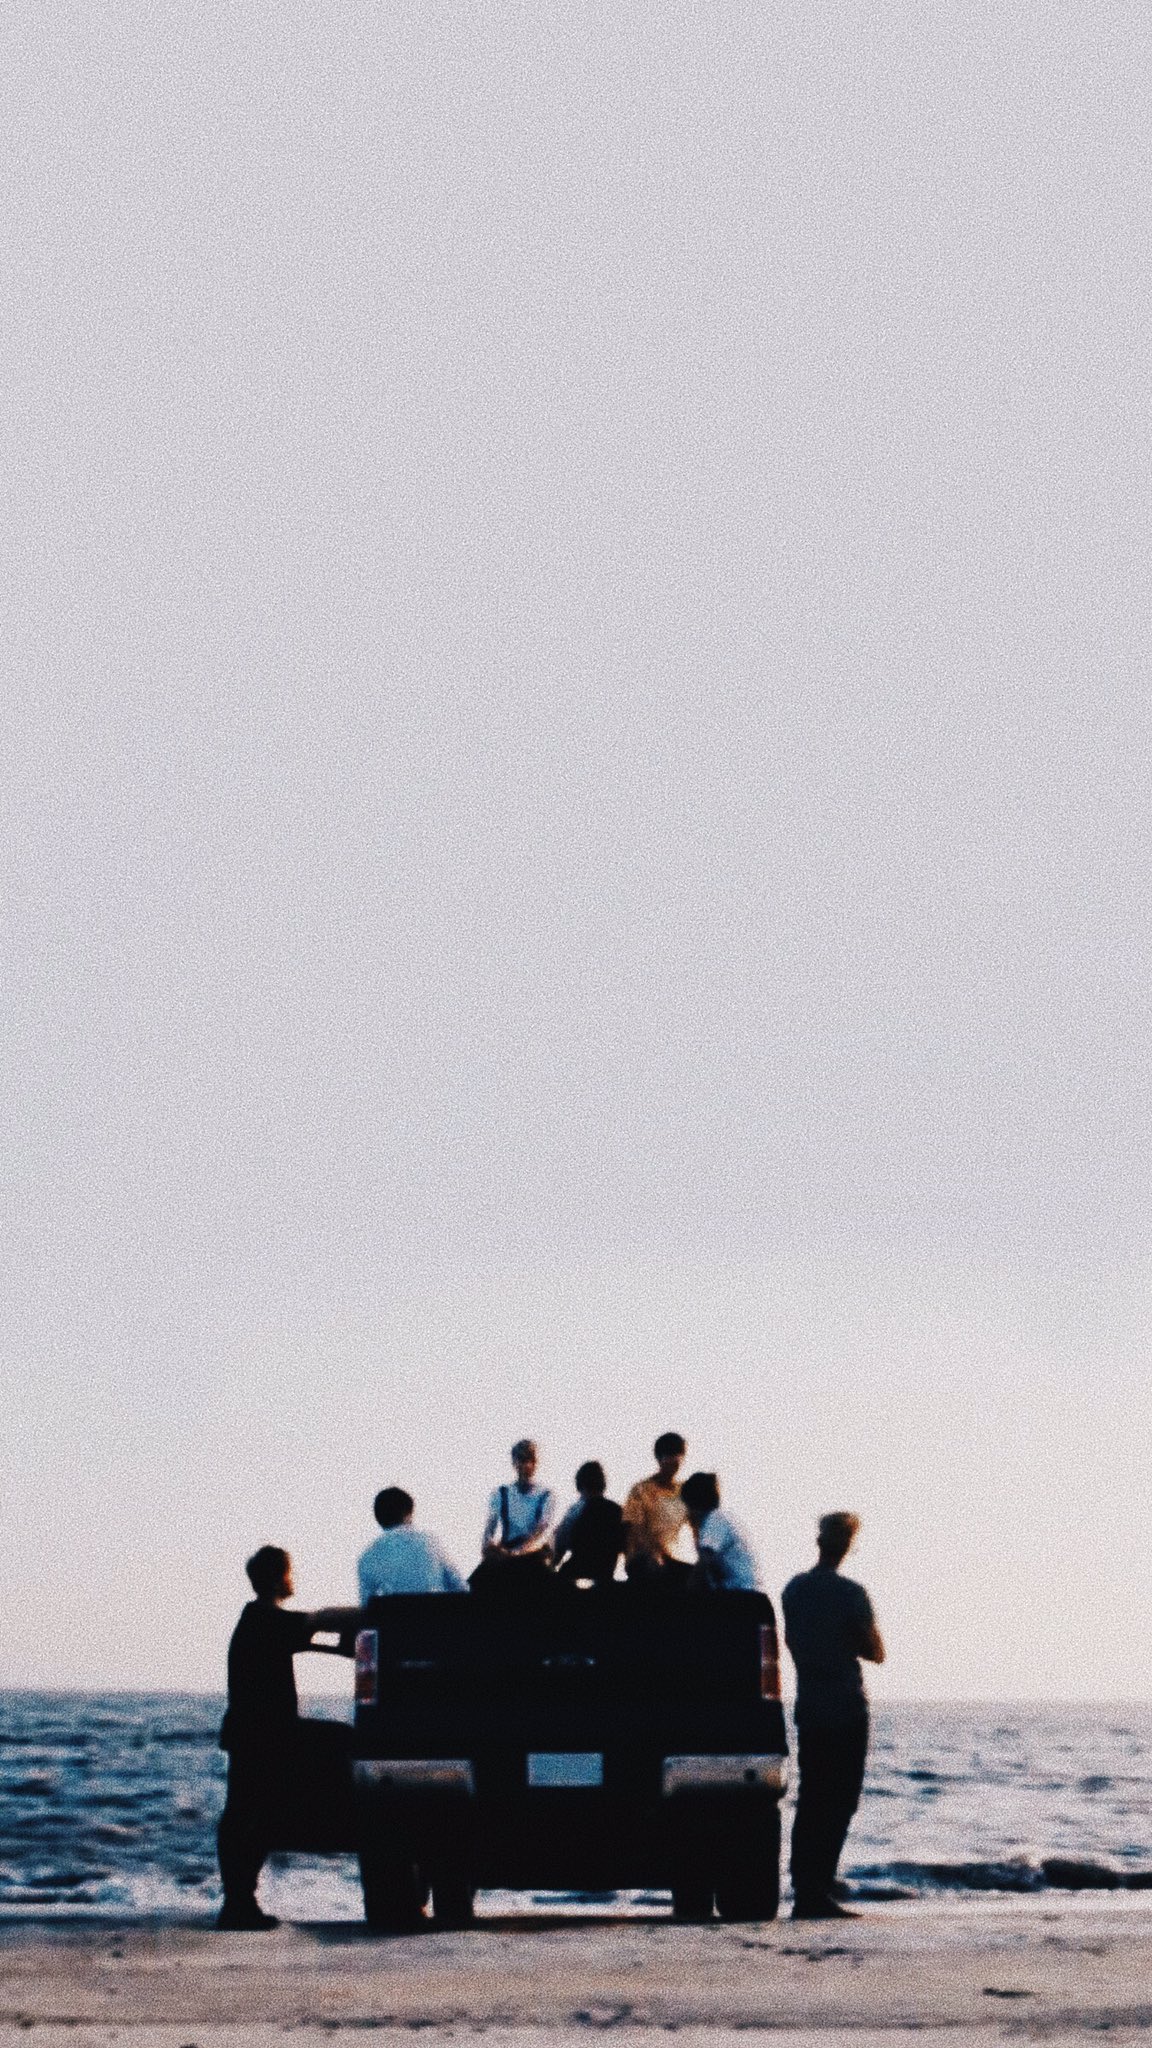 Bts Wallpaper On Rt Like If You Save Use